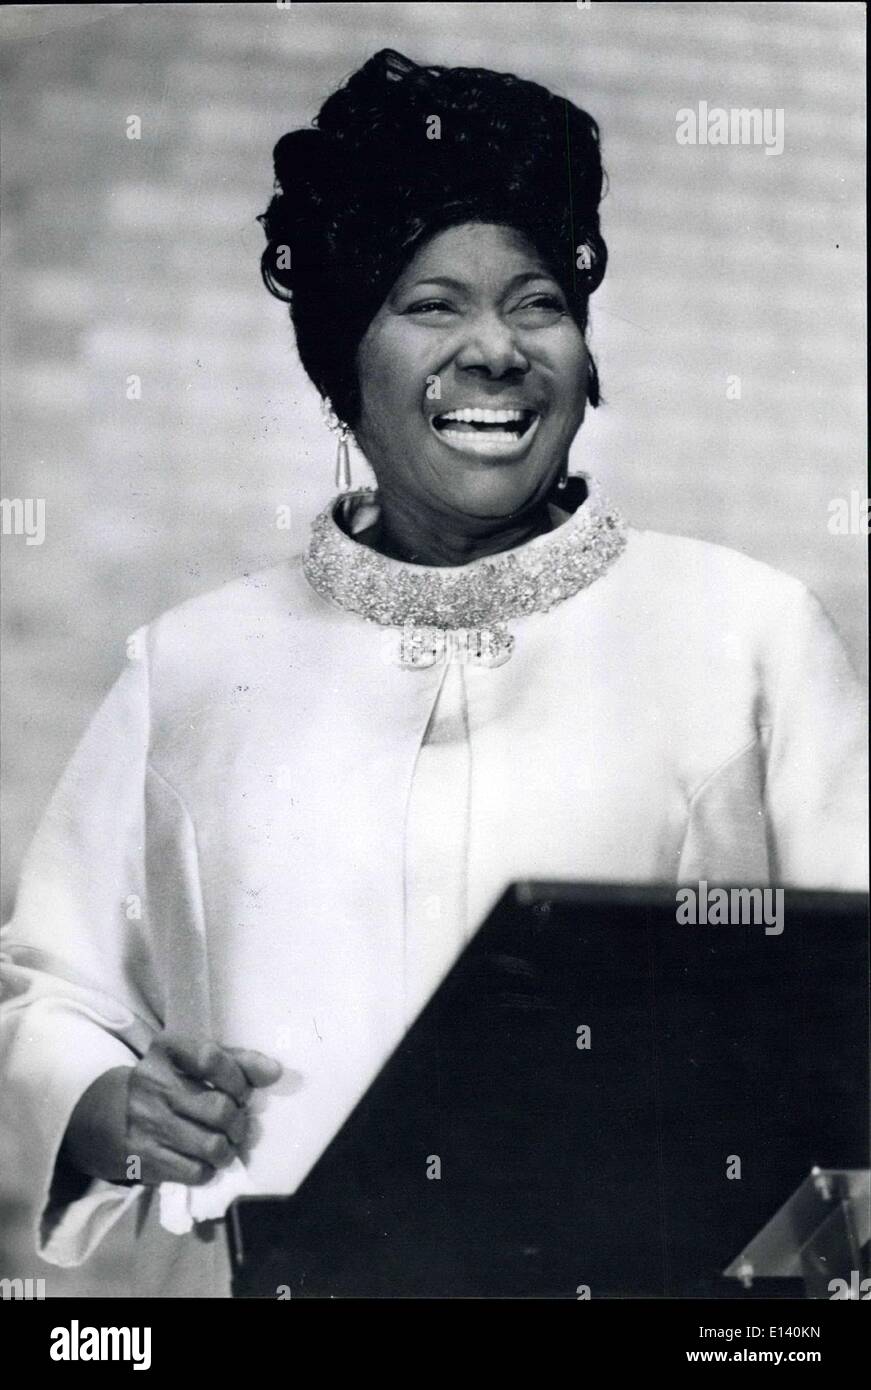 Mar. 31, 2012 - MAHALIA JACKSON SINGS AT IMPERIAL PALACE: Famed American songstress Mahalia Jackson, made her dream come true, by holding a recital in the Imperial Palace in Tokyo before a royal audience including the Empress of Japan. She sang nine ethnic Spirituals, including one composed here to celebrate the Emperor's 70th birthday on April 29th. Photo: Mahalia Jackson singing at the Imperial Palace in Tokyo. Stock Photo